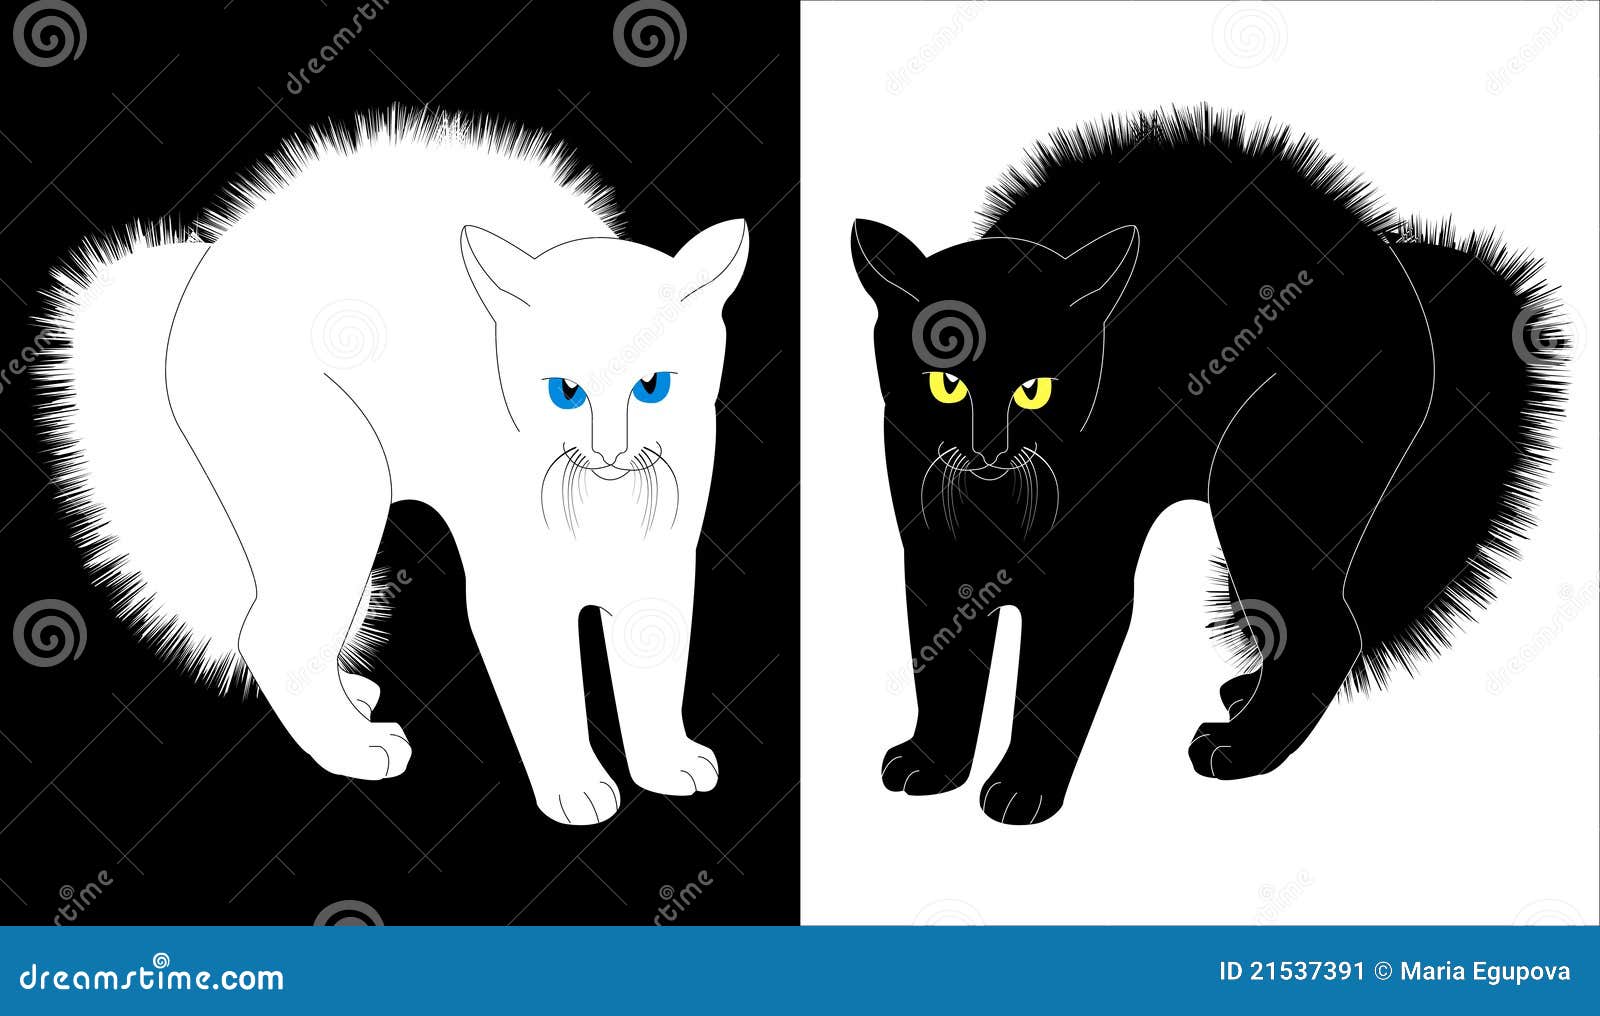 Angry Cat Stock Illustrations, Cliparts and Royalty Free Angry Cat